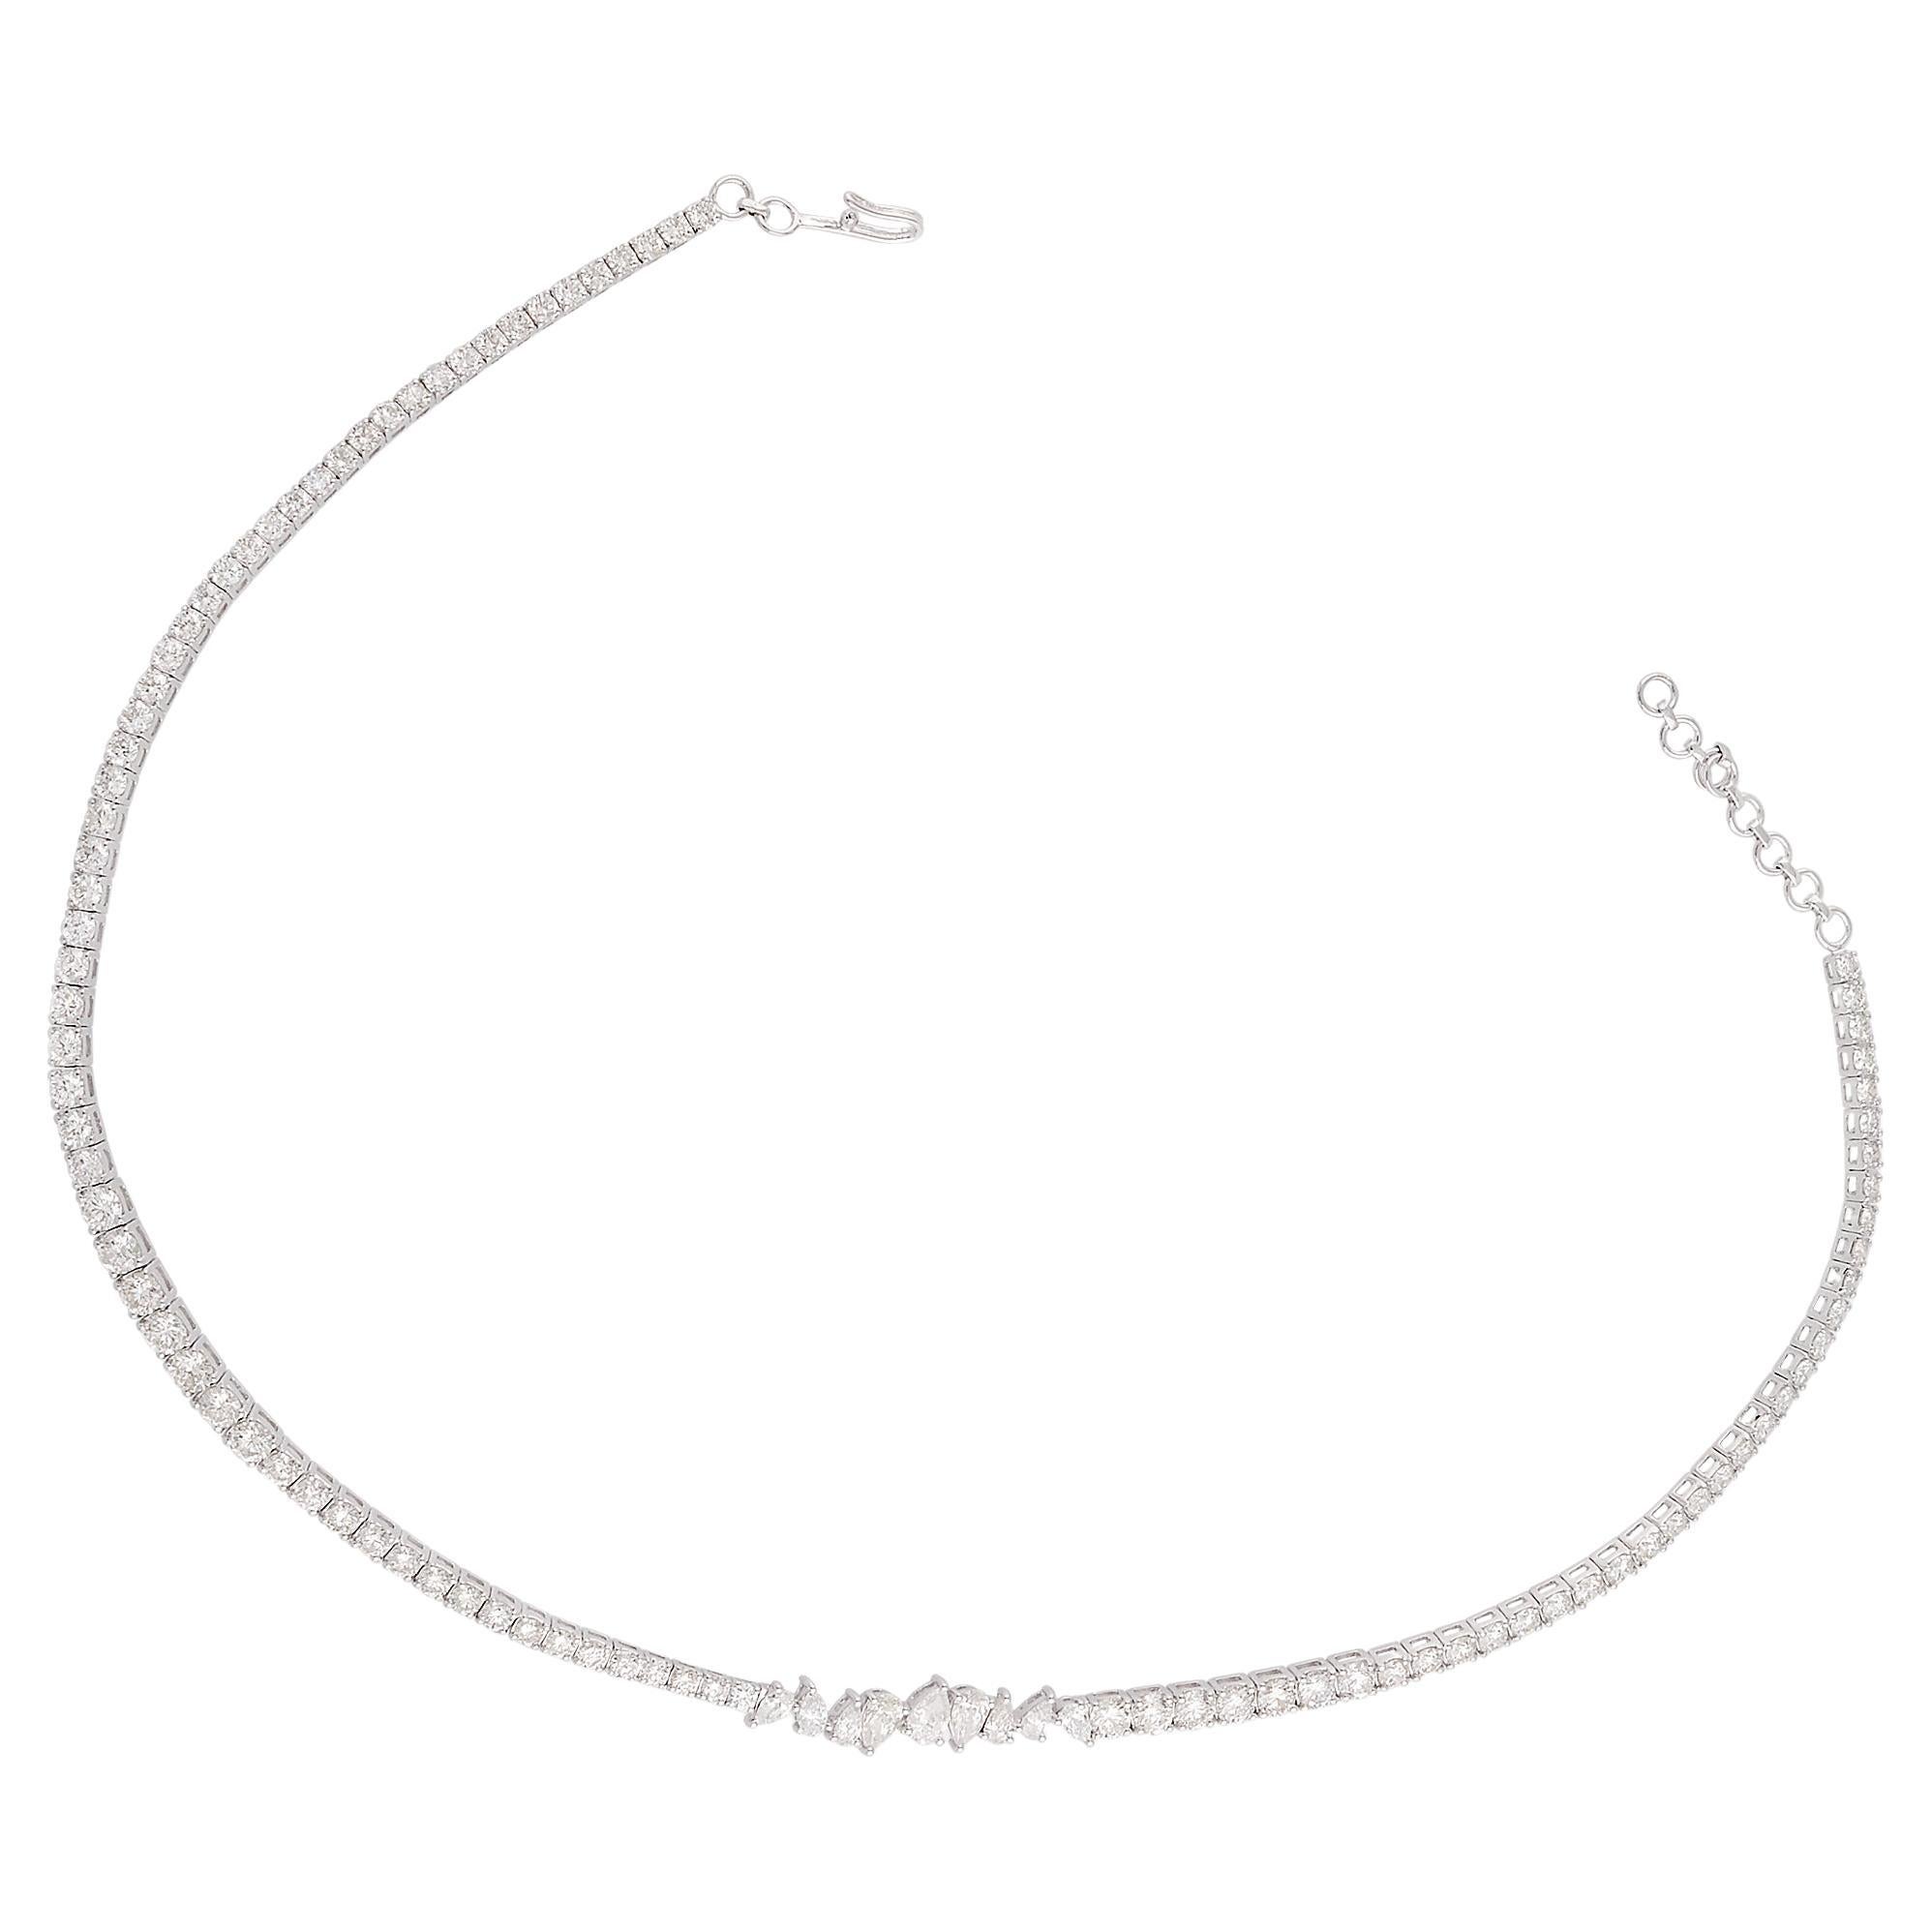 8.7 Carat SI Clarity HI Color Pear Round Diamond Choker Necklace 14k White Gold For Sale